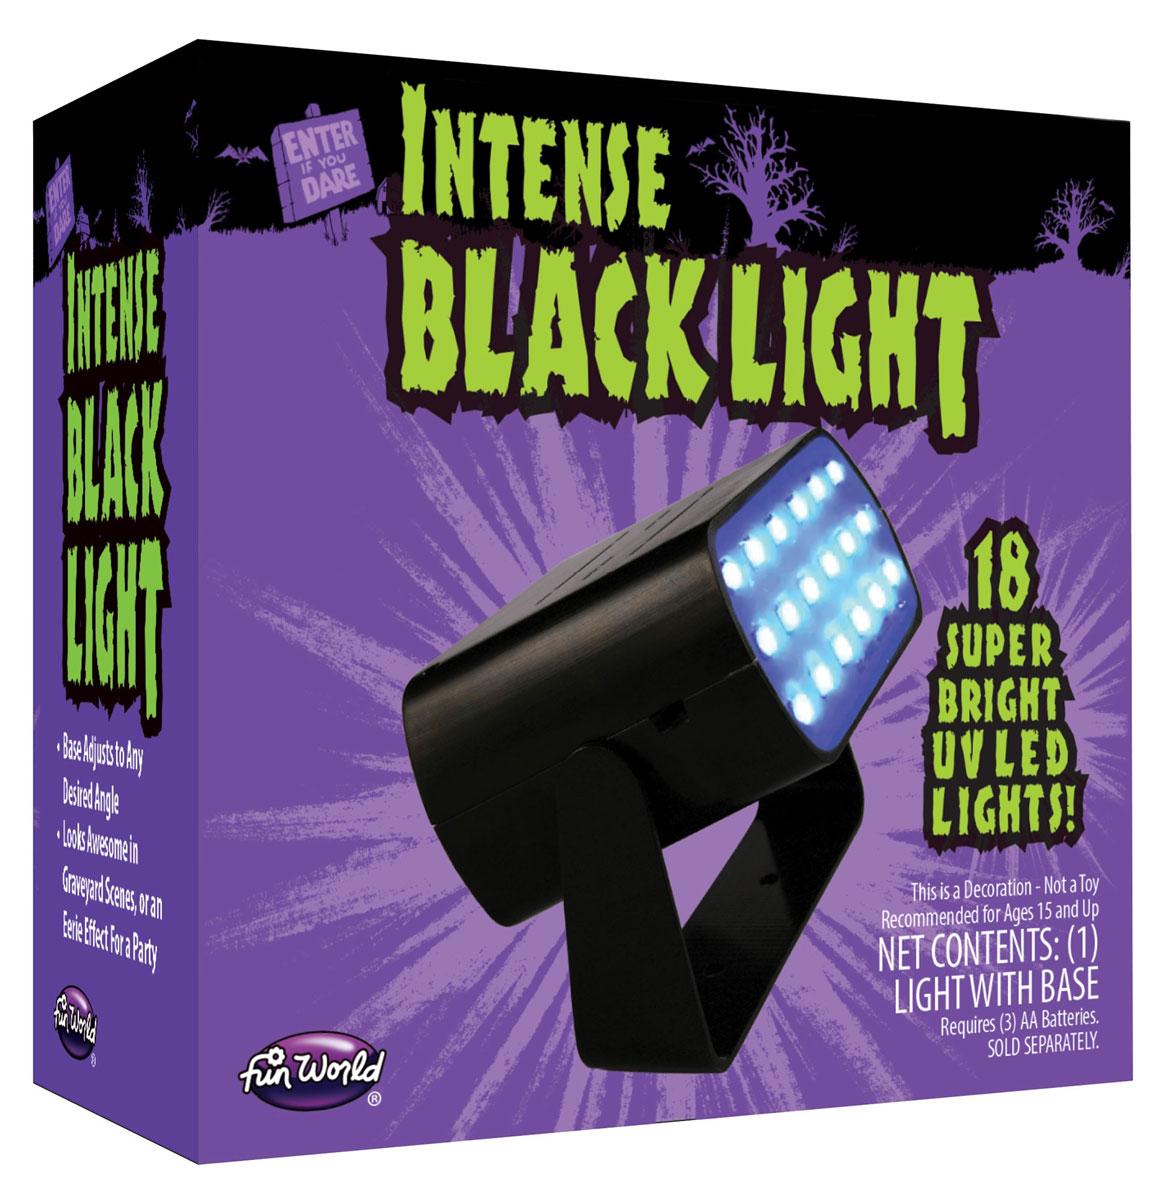 18 LED Intense Black Light by Fun World 97102 available in the UK here at Karnival Costumes online party shop